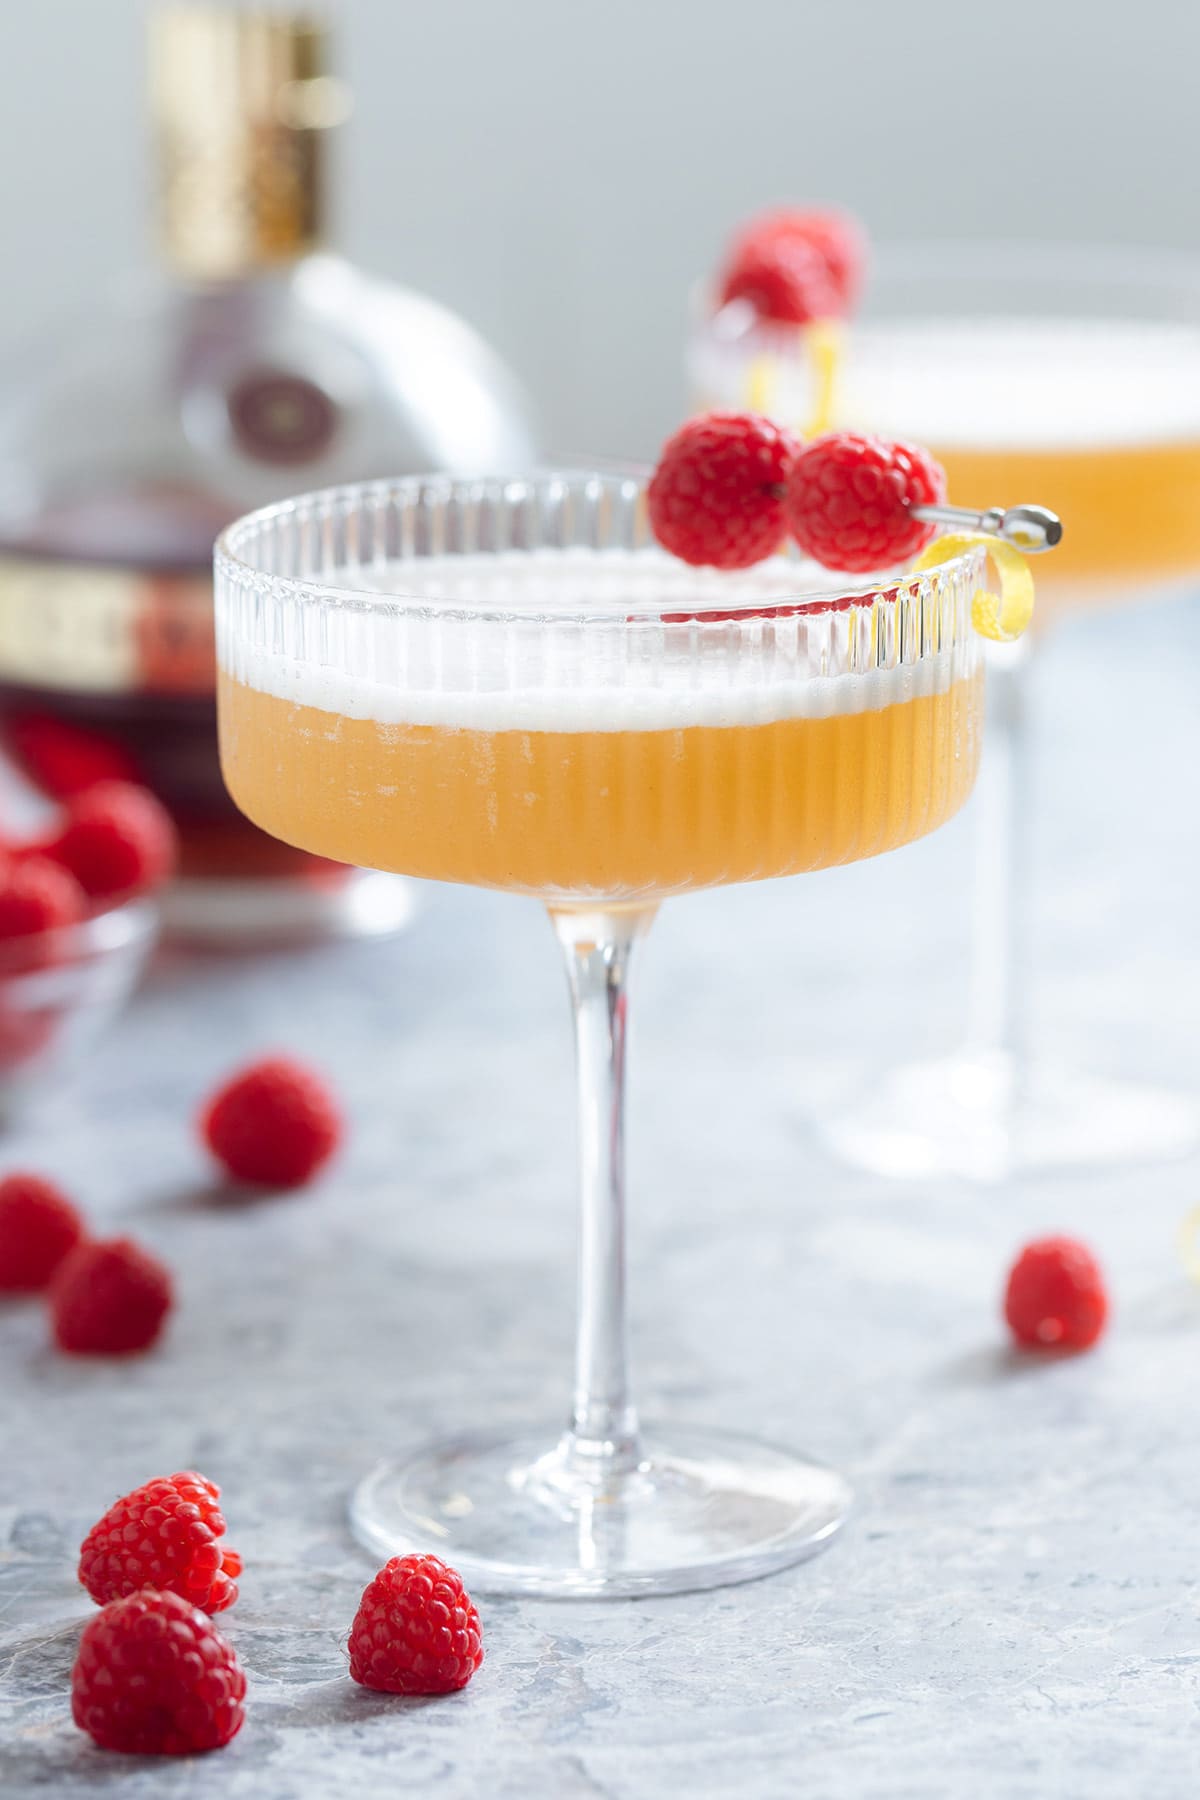 A martini glass with light orange colored cocktail with foam on top garnished with two raspberries on a cocktail pick and a lemon twist with more raspberries around and another cocktail in the background.